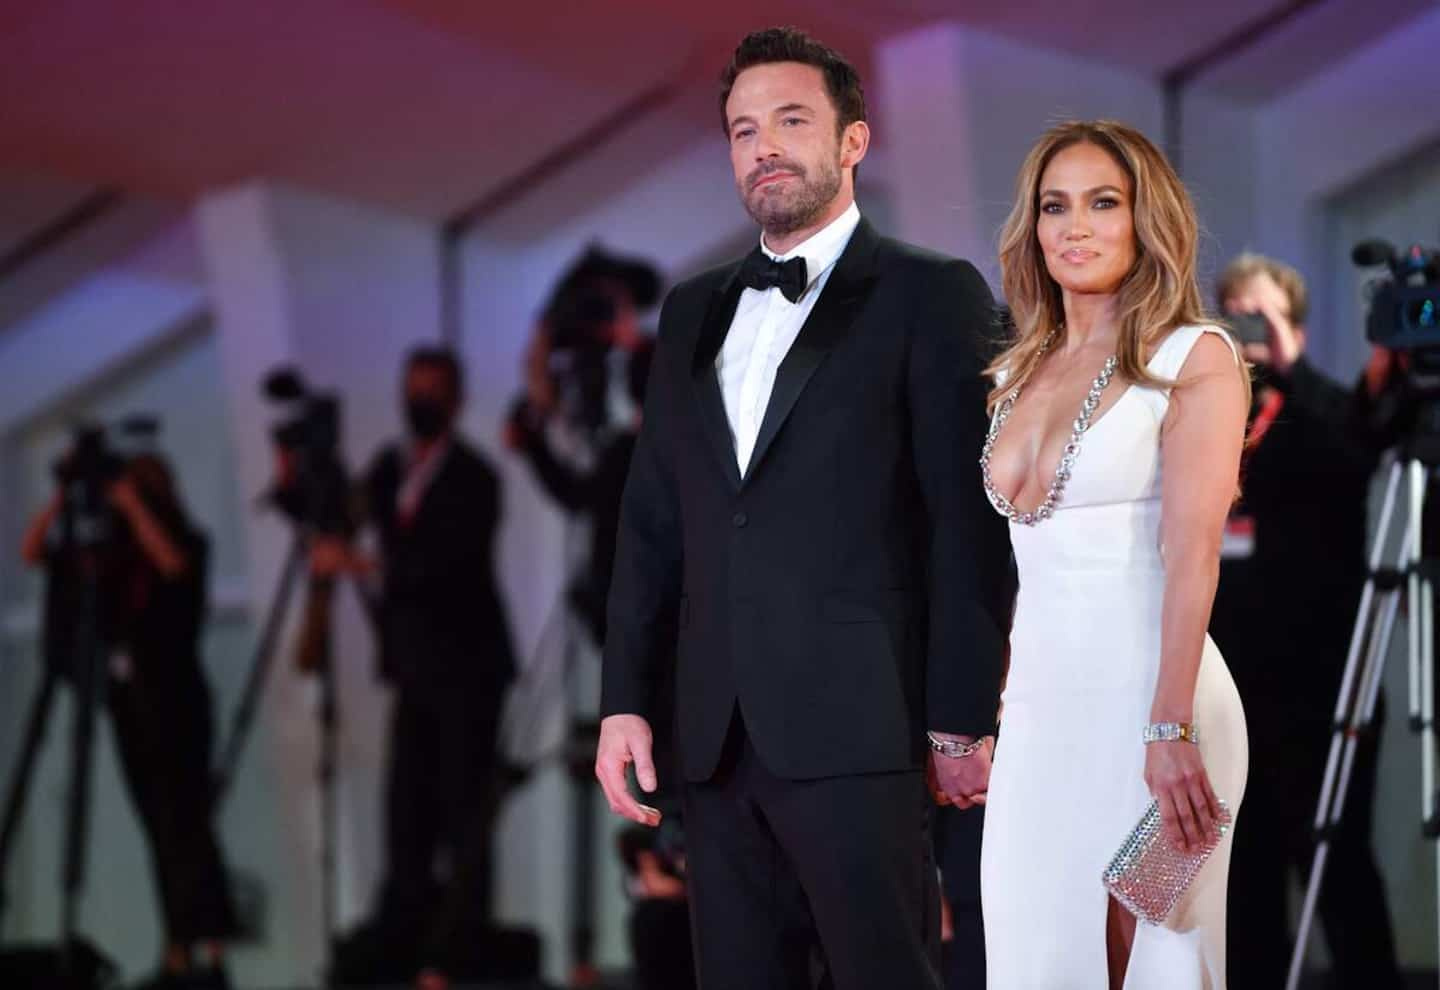 Boxing gala postponed because of the marriage of J-Lo and Ben Affleck?